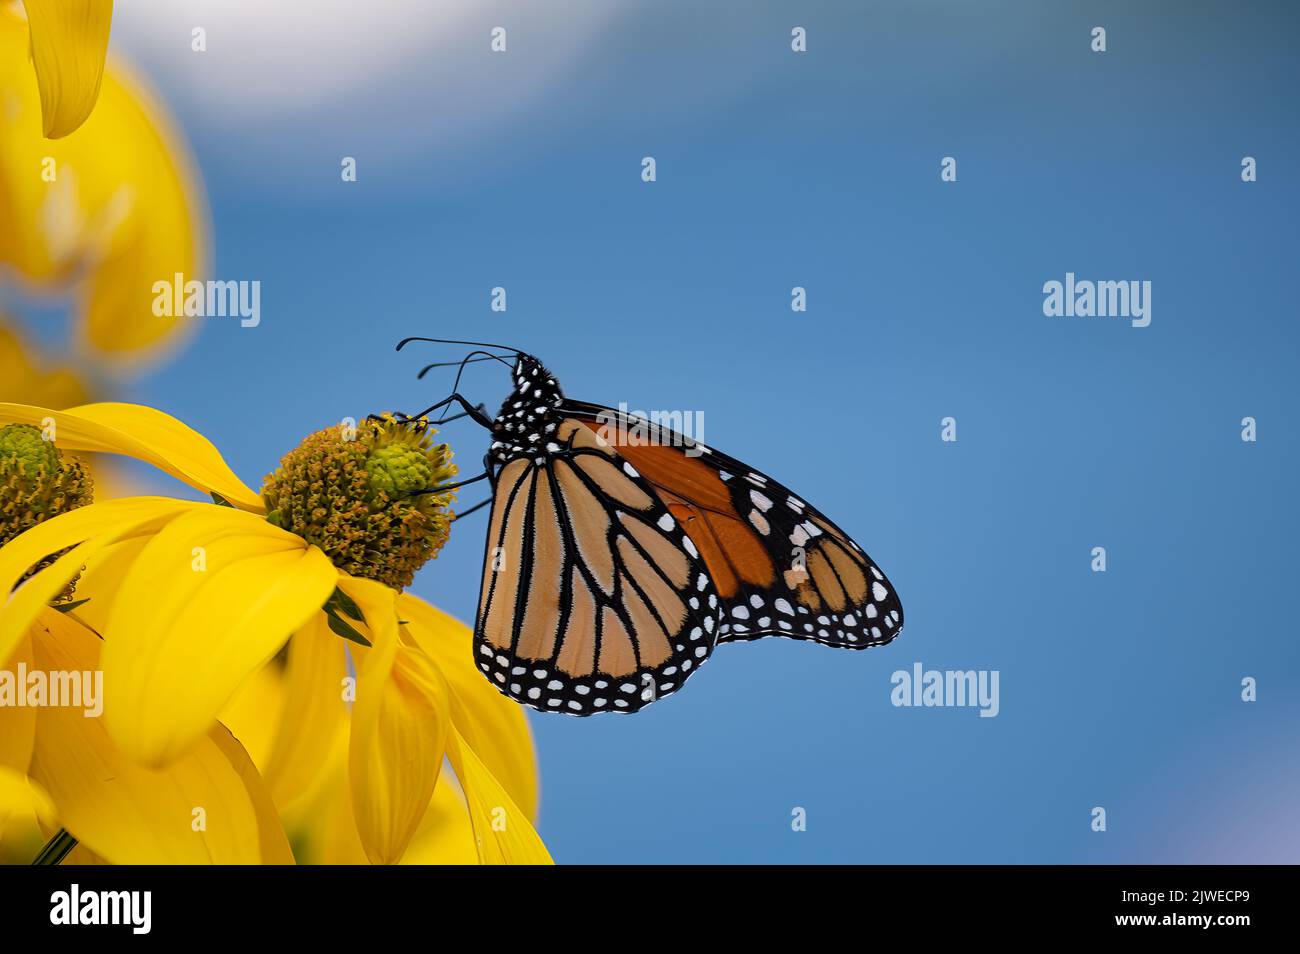 A Monarch Butterfly, Danaus plexippus, pollinating Rudbeckia flowers in a garden in Speculator, NY USA with a clear blue sky background. Stock Photo